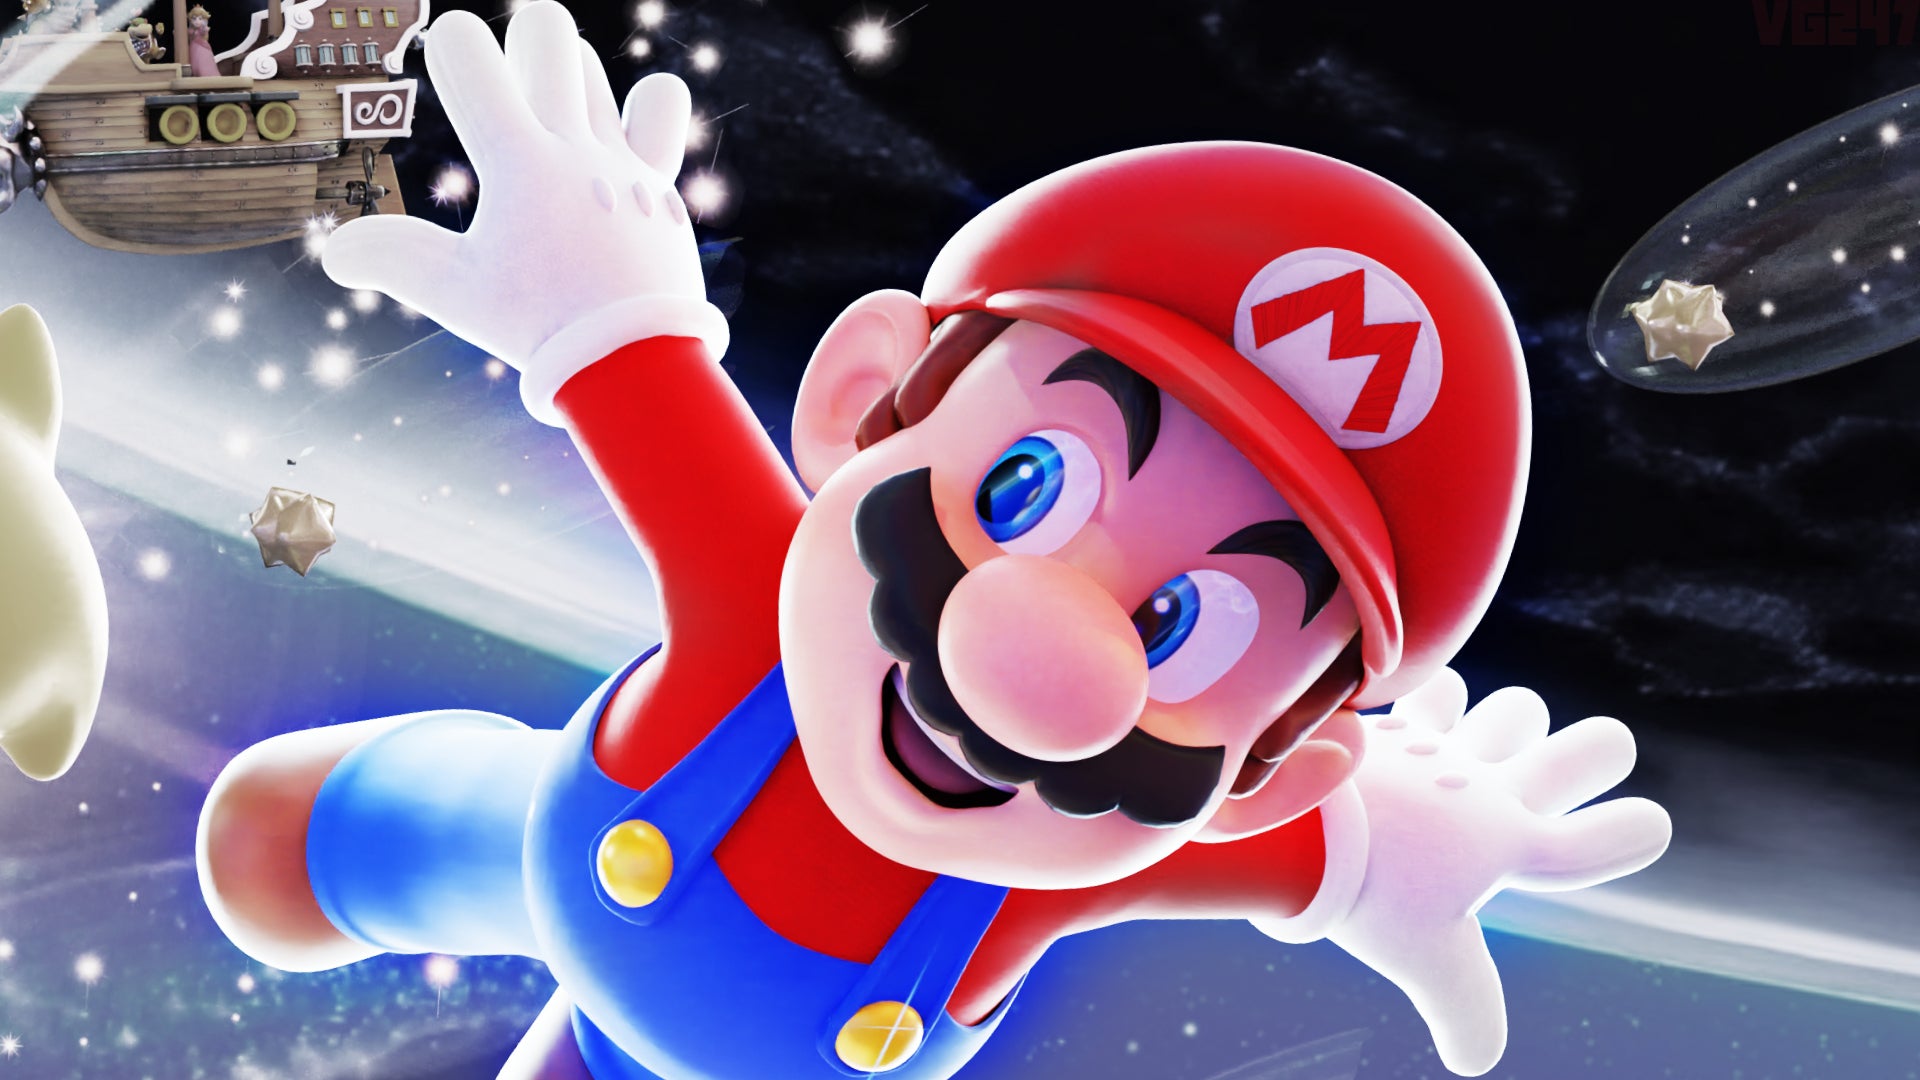 15 years later, Super Mario Galaxy is still the series’ most stellar entry